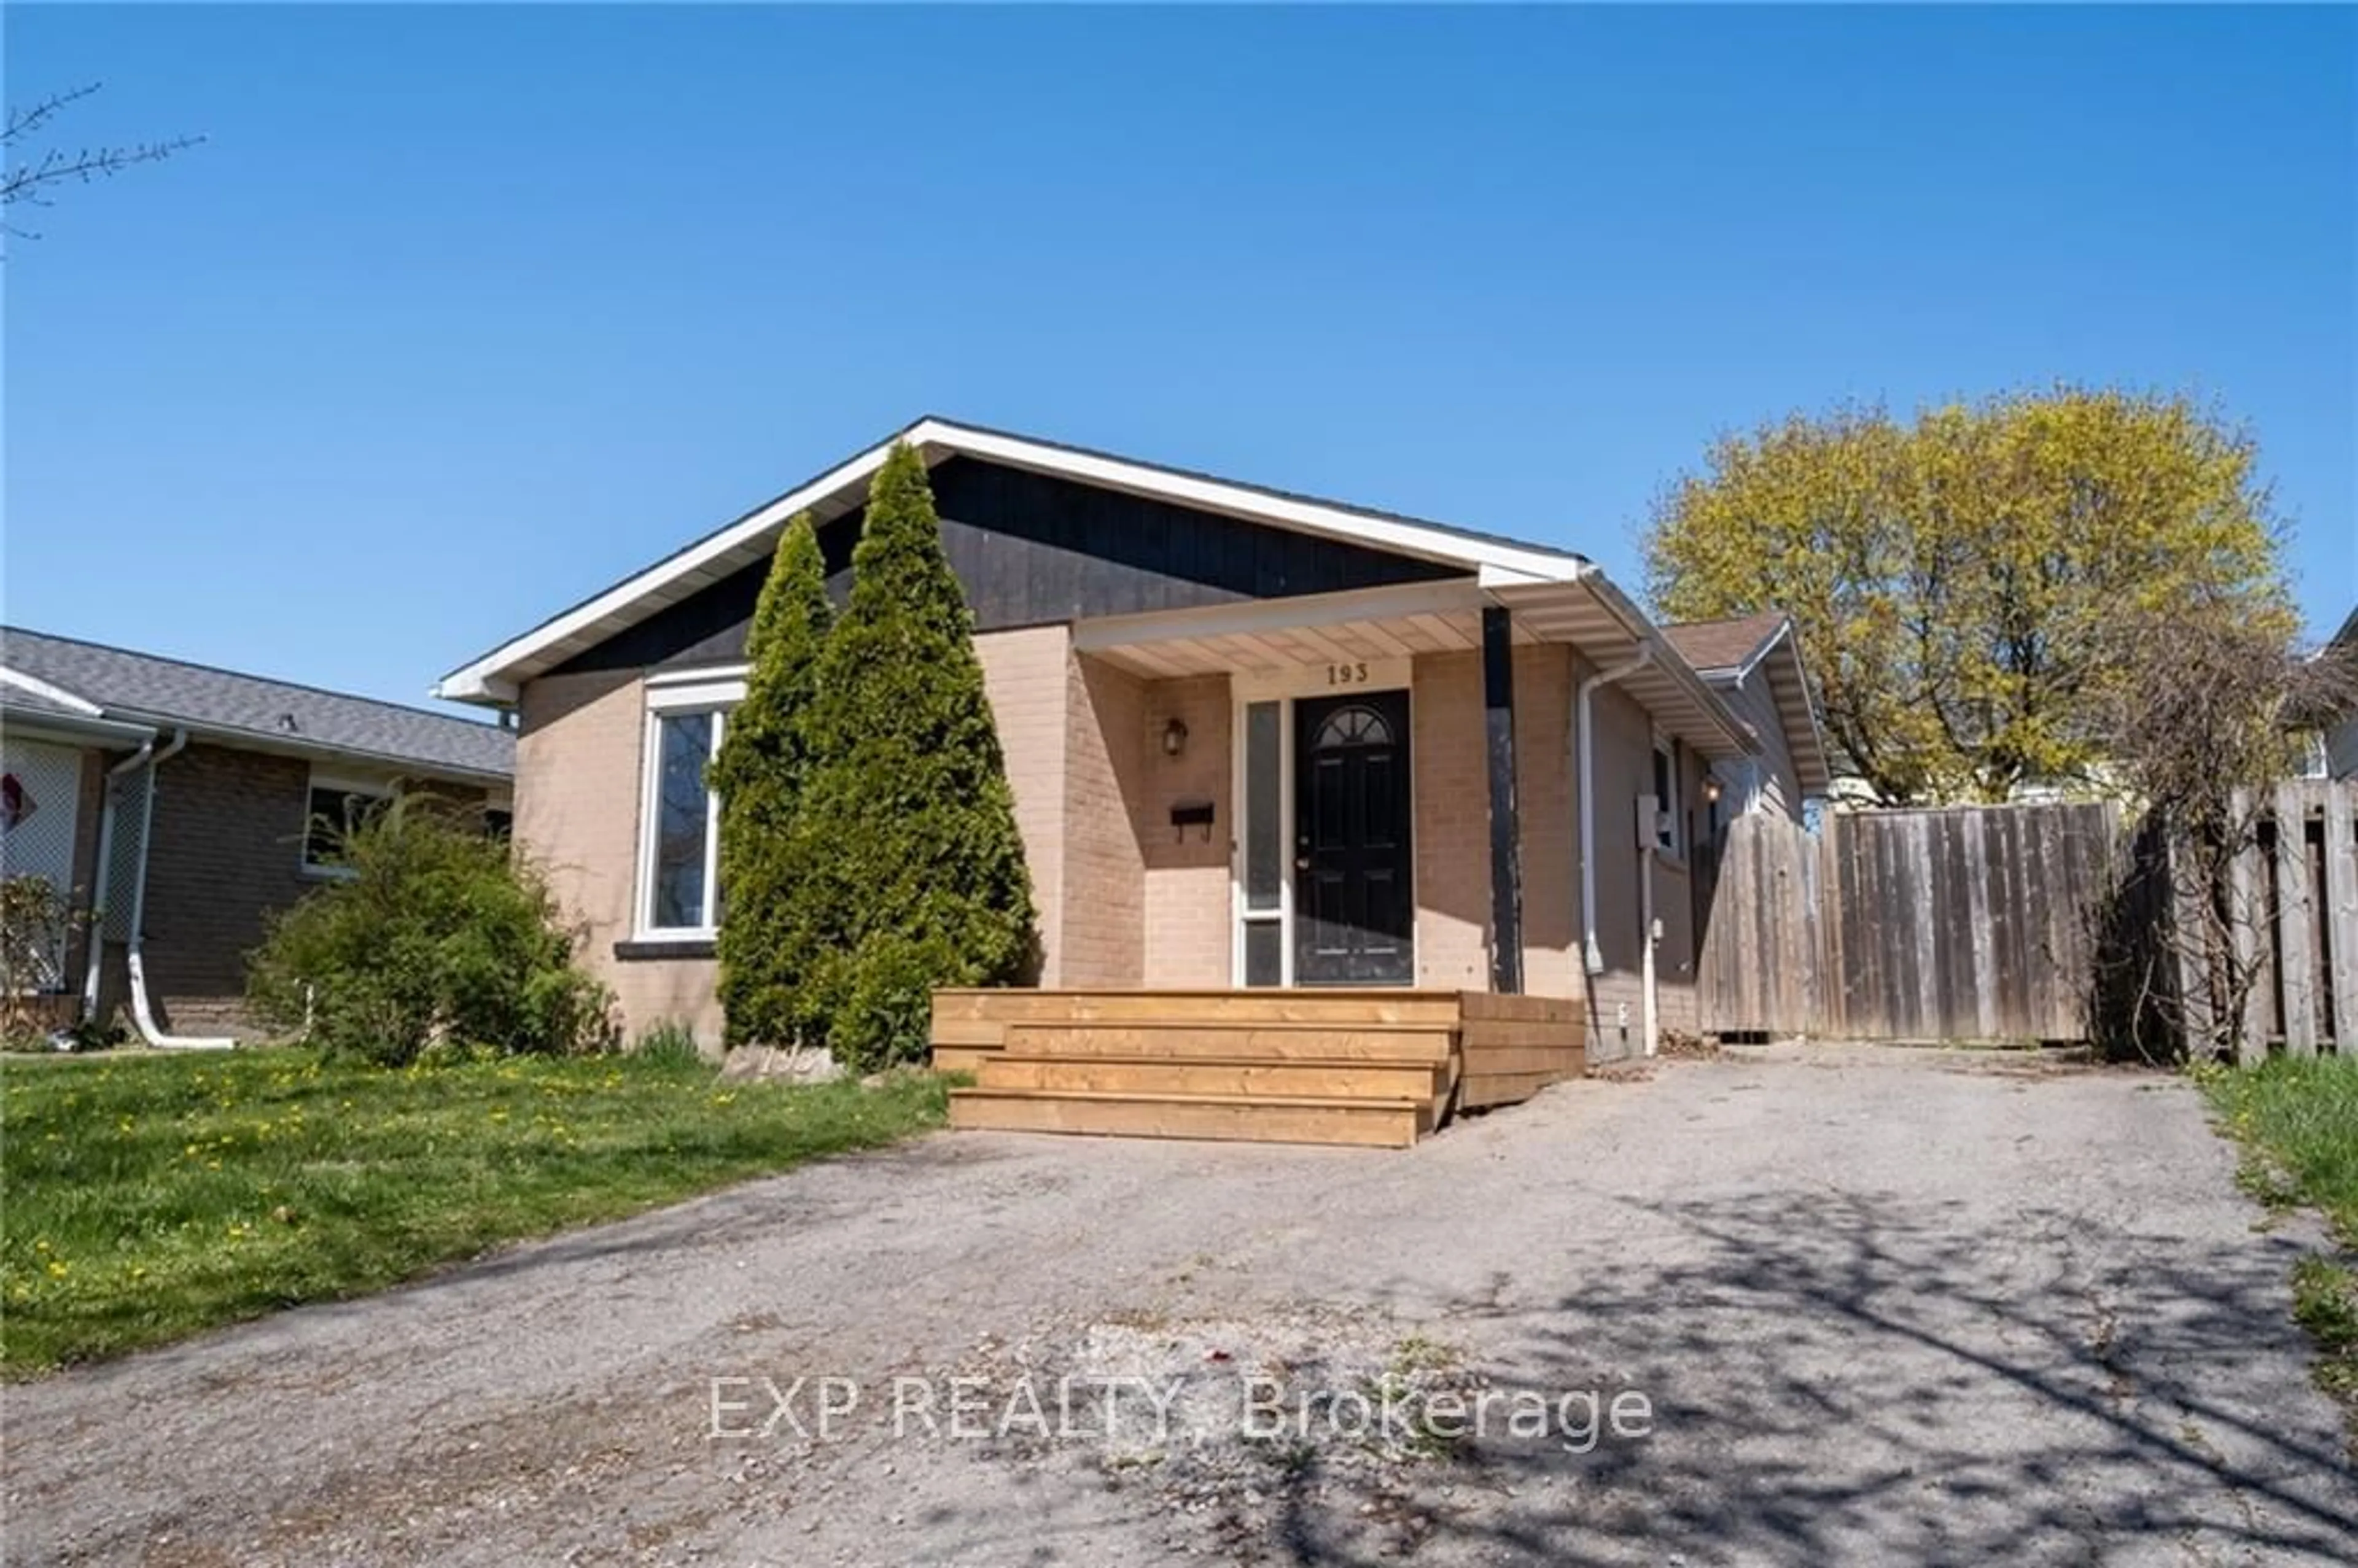 Frontside or backside of a home for 193 Keefer Rd, Thorold Ontario L2V 4N3